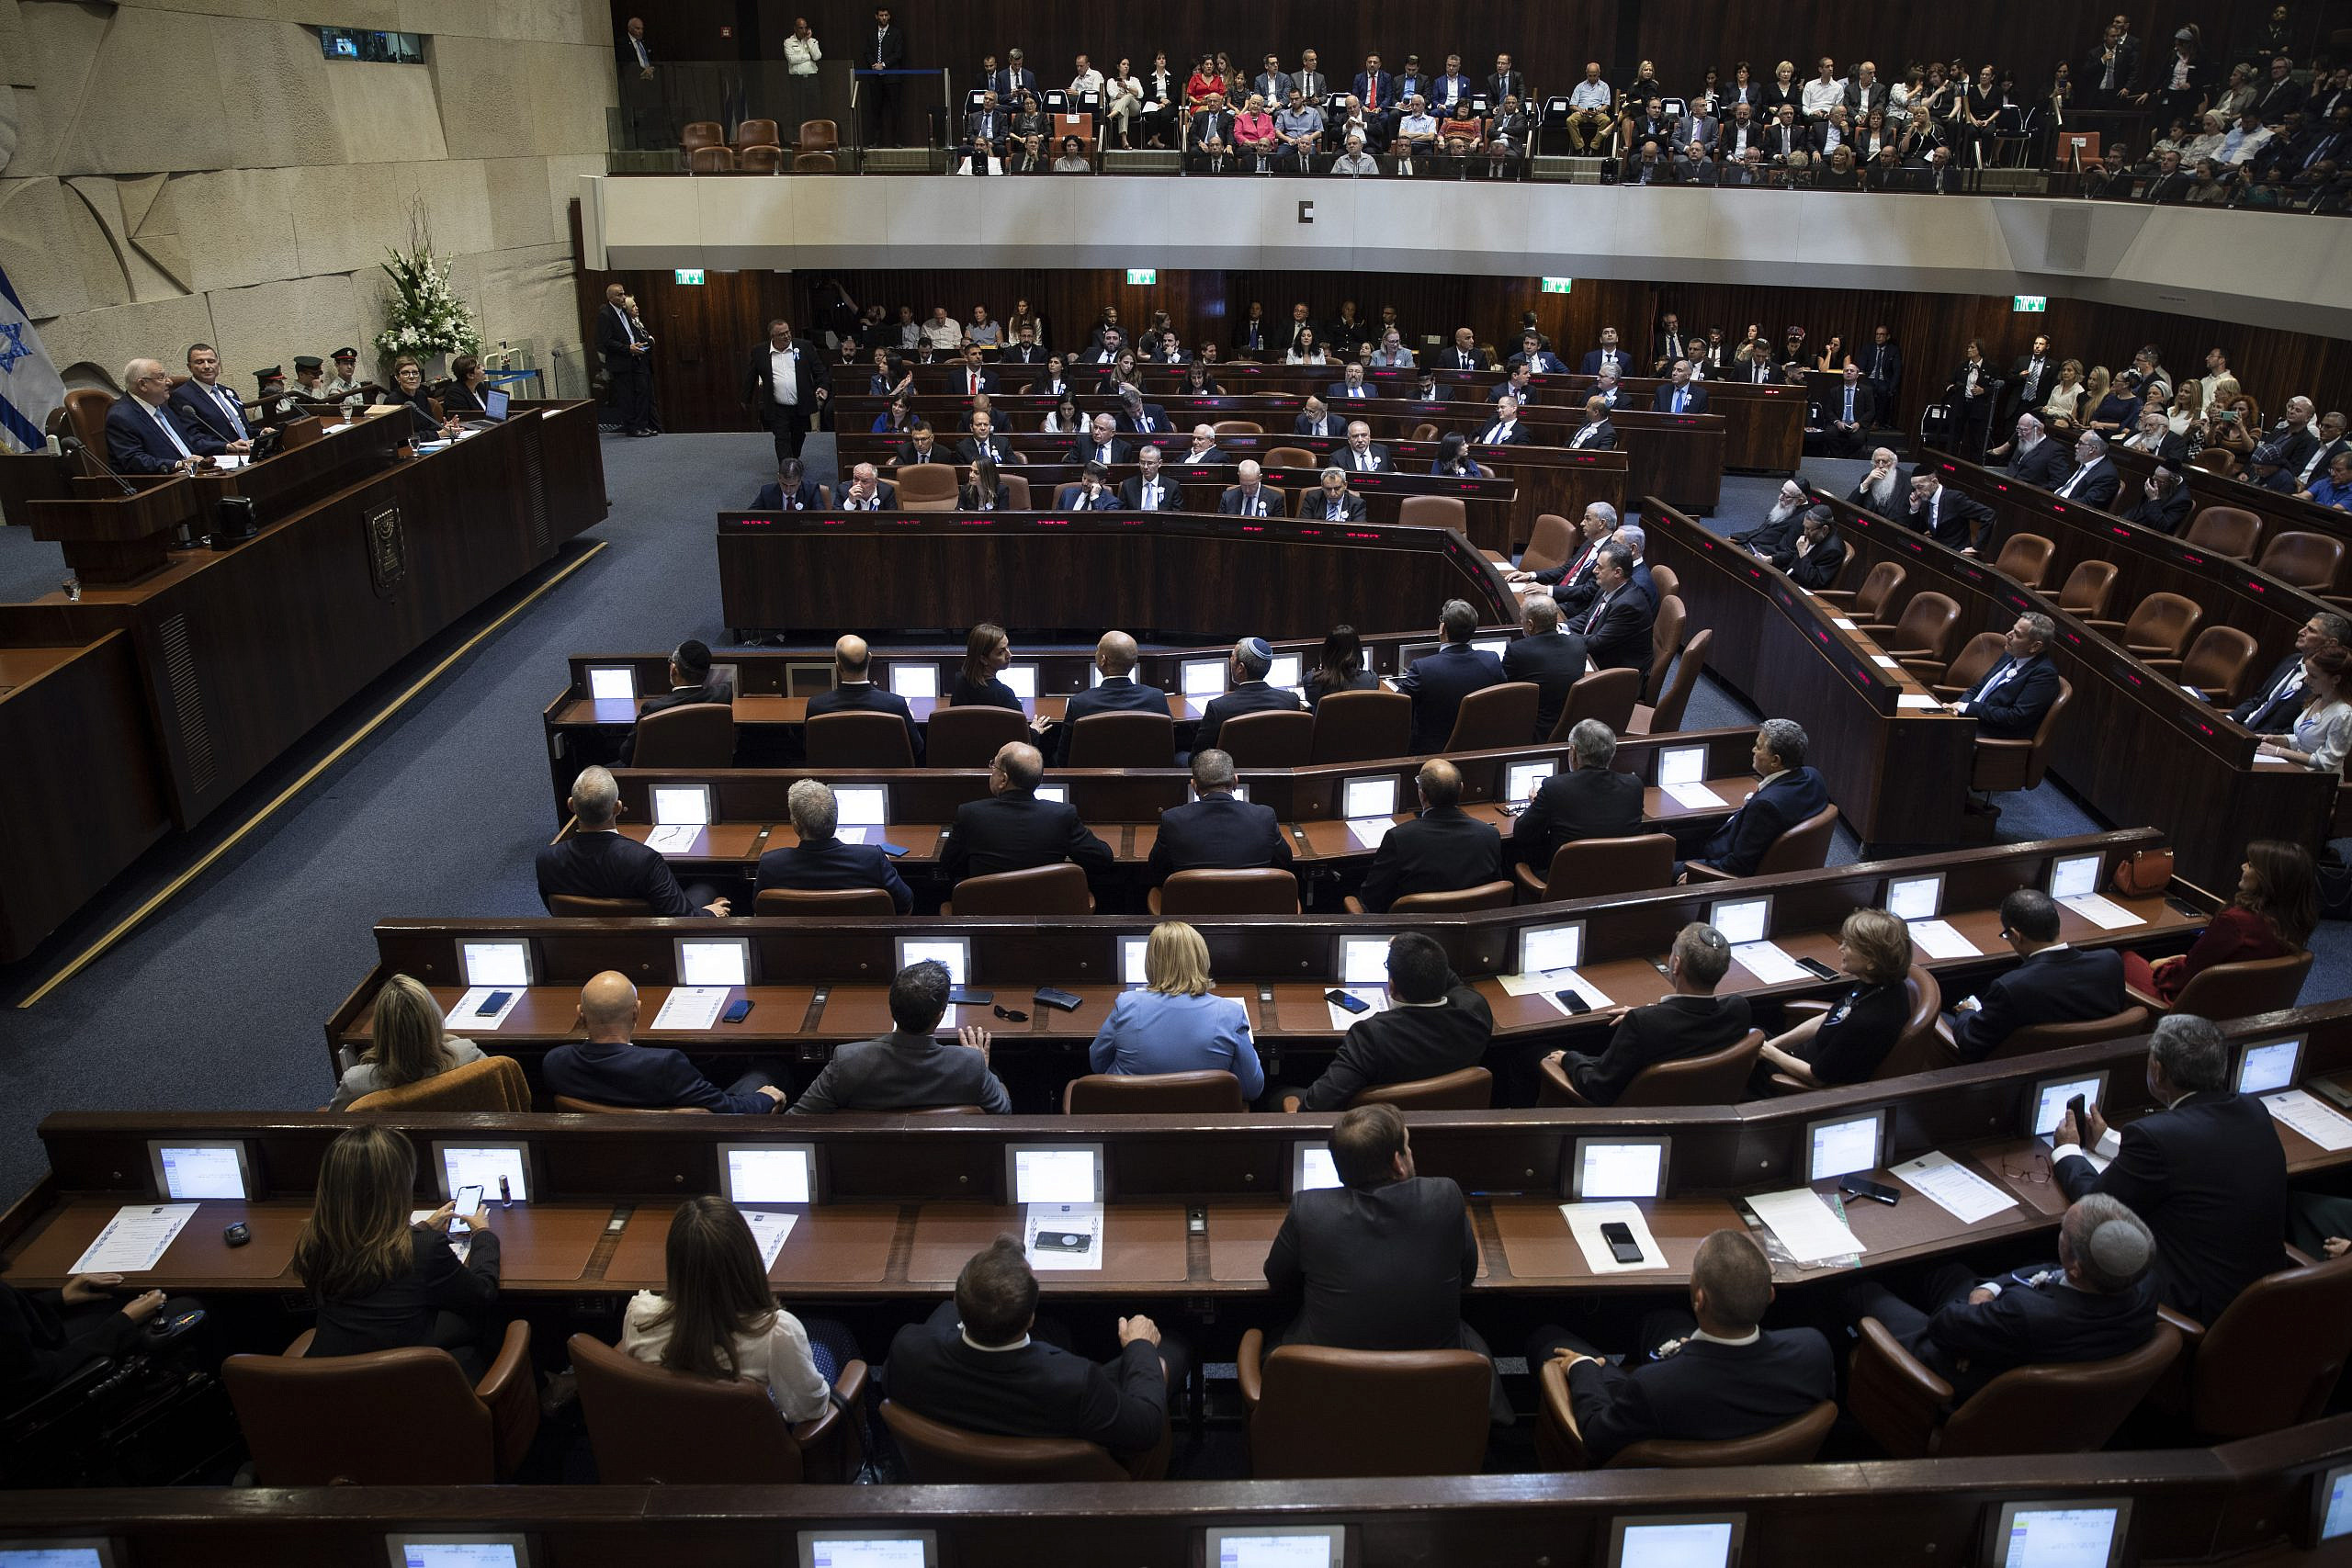 Knesset votes 99-11 against any unilateral recognition of Pal state